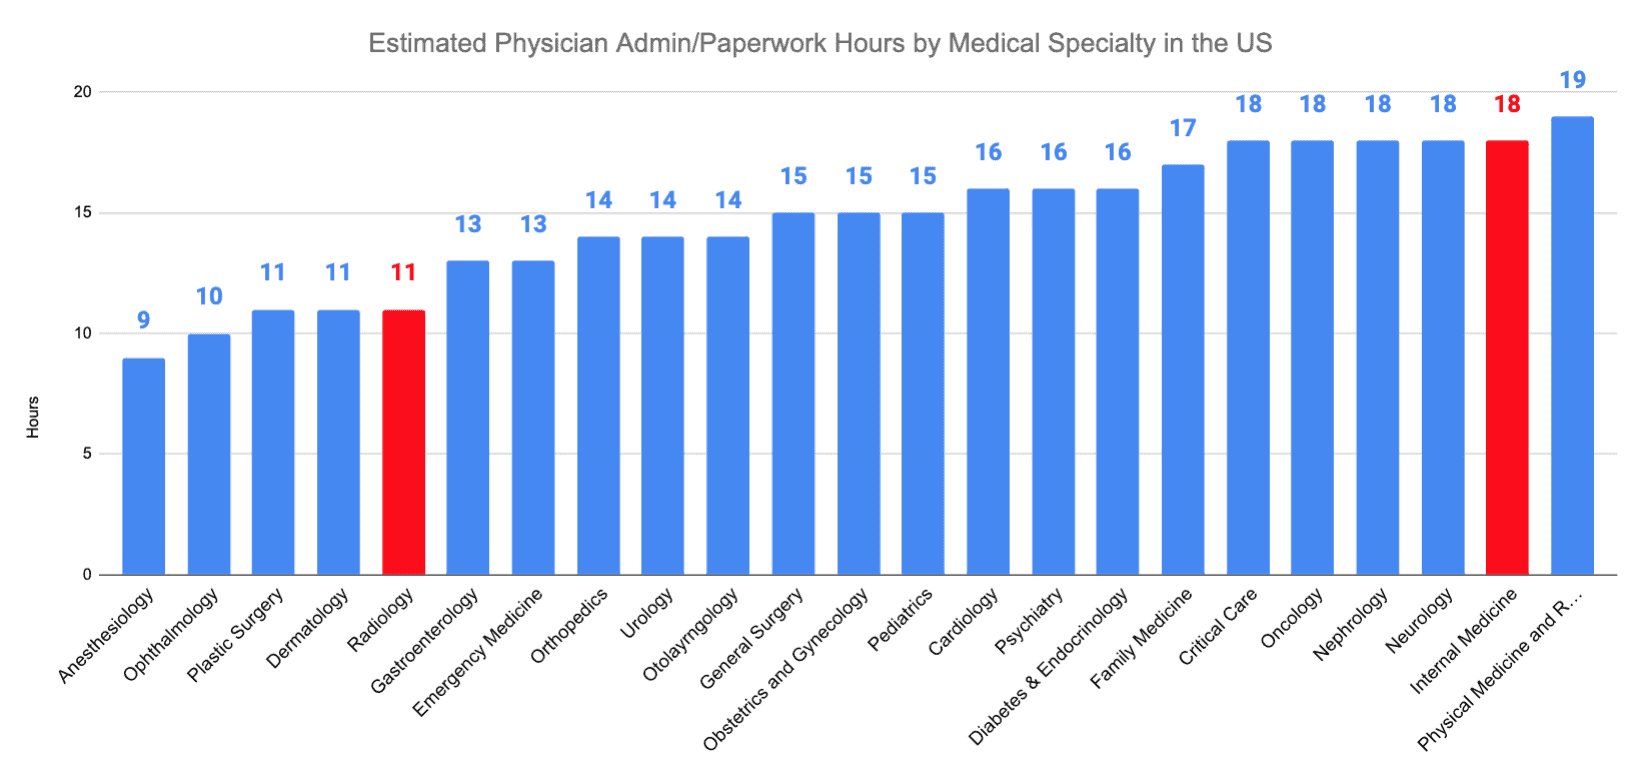 Radiology vs. Internal Medicine Estimated Physician Admin/Paperwork Hours by Medical Specialty in the US